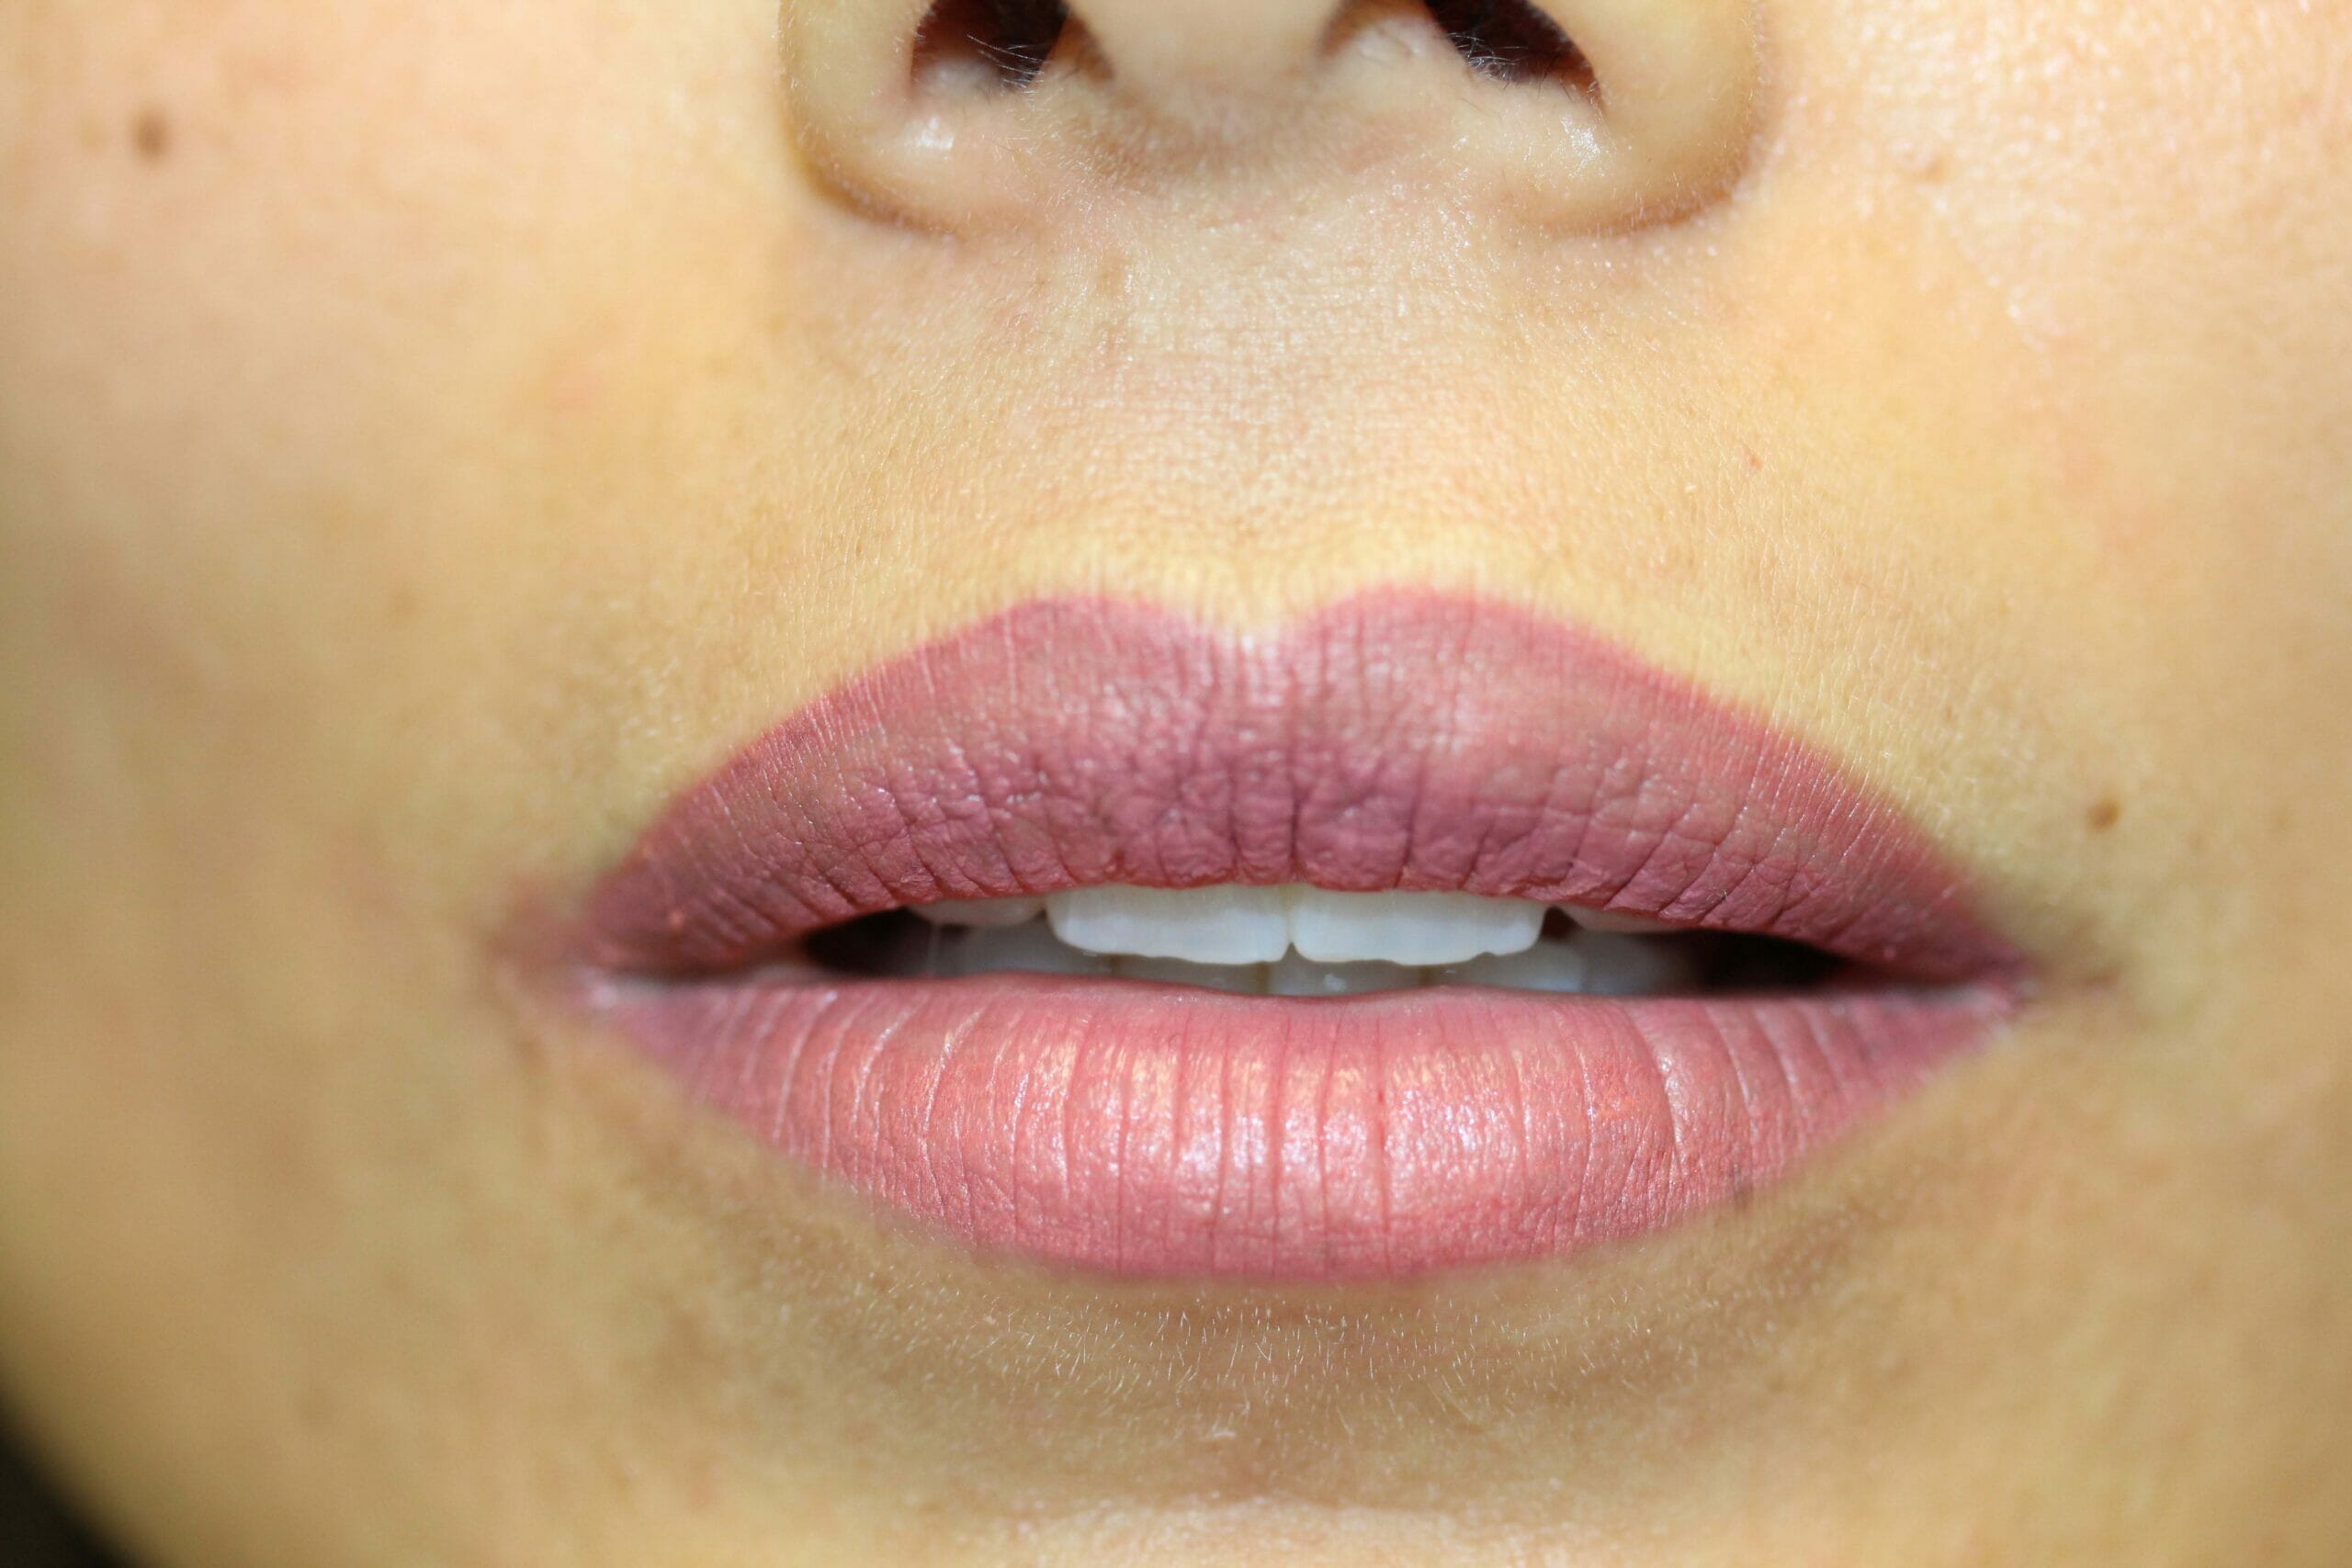 Lip Liner Before and After Photos - Ruth Swissa